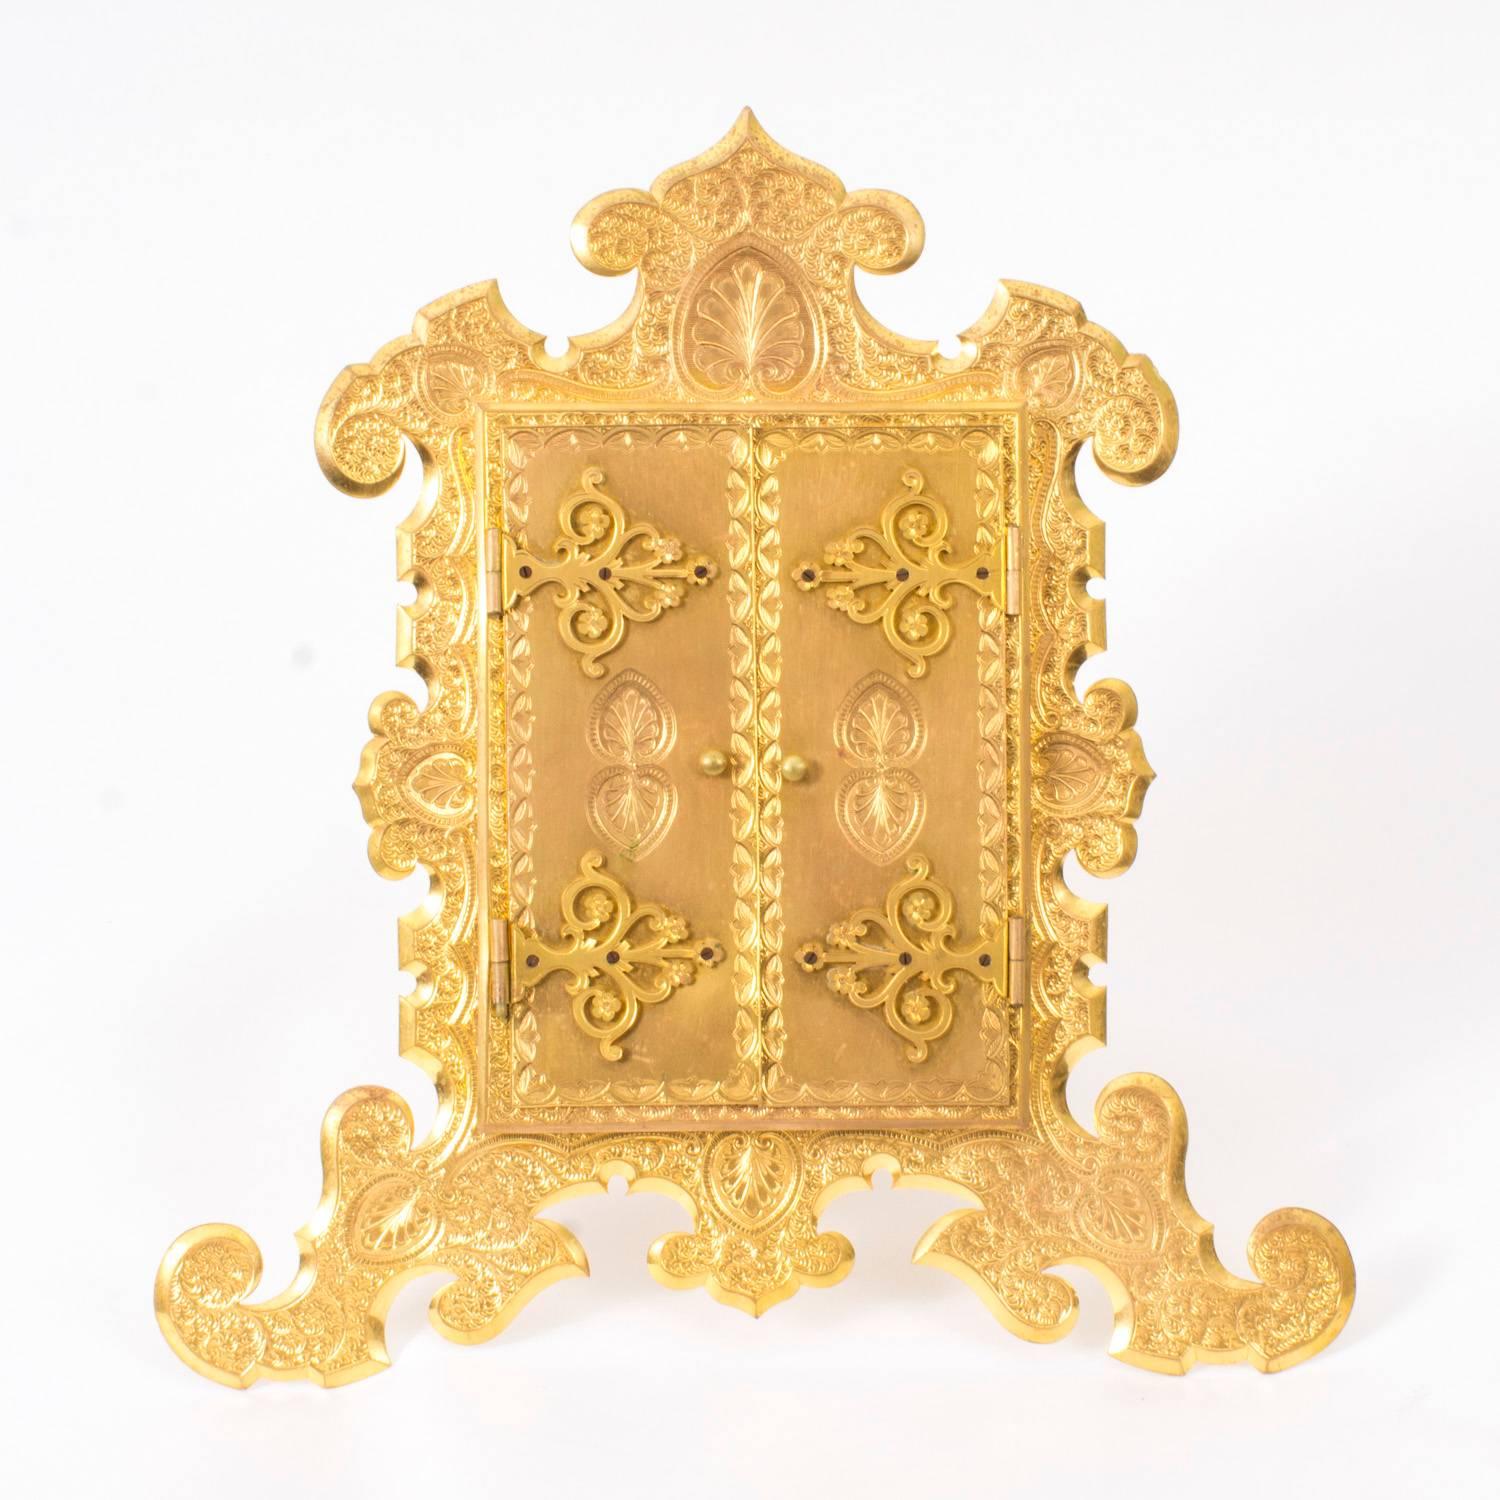 This is a lovely antique English Victorian gilt bronze picture frame, circa 1870 in date. 

The shaped frame features highly detailed engraved decoration with twin doors which open to reveal a rectangular recess for your photo. The back is